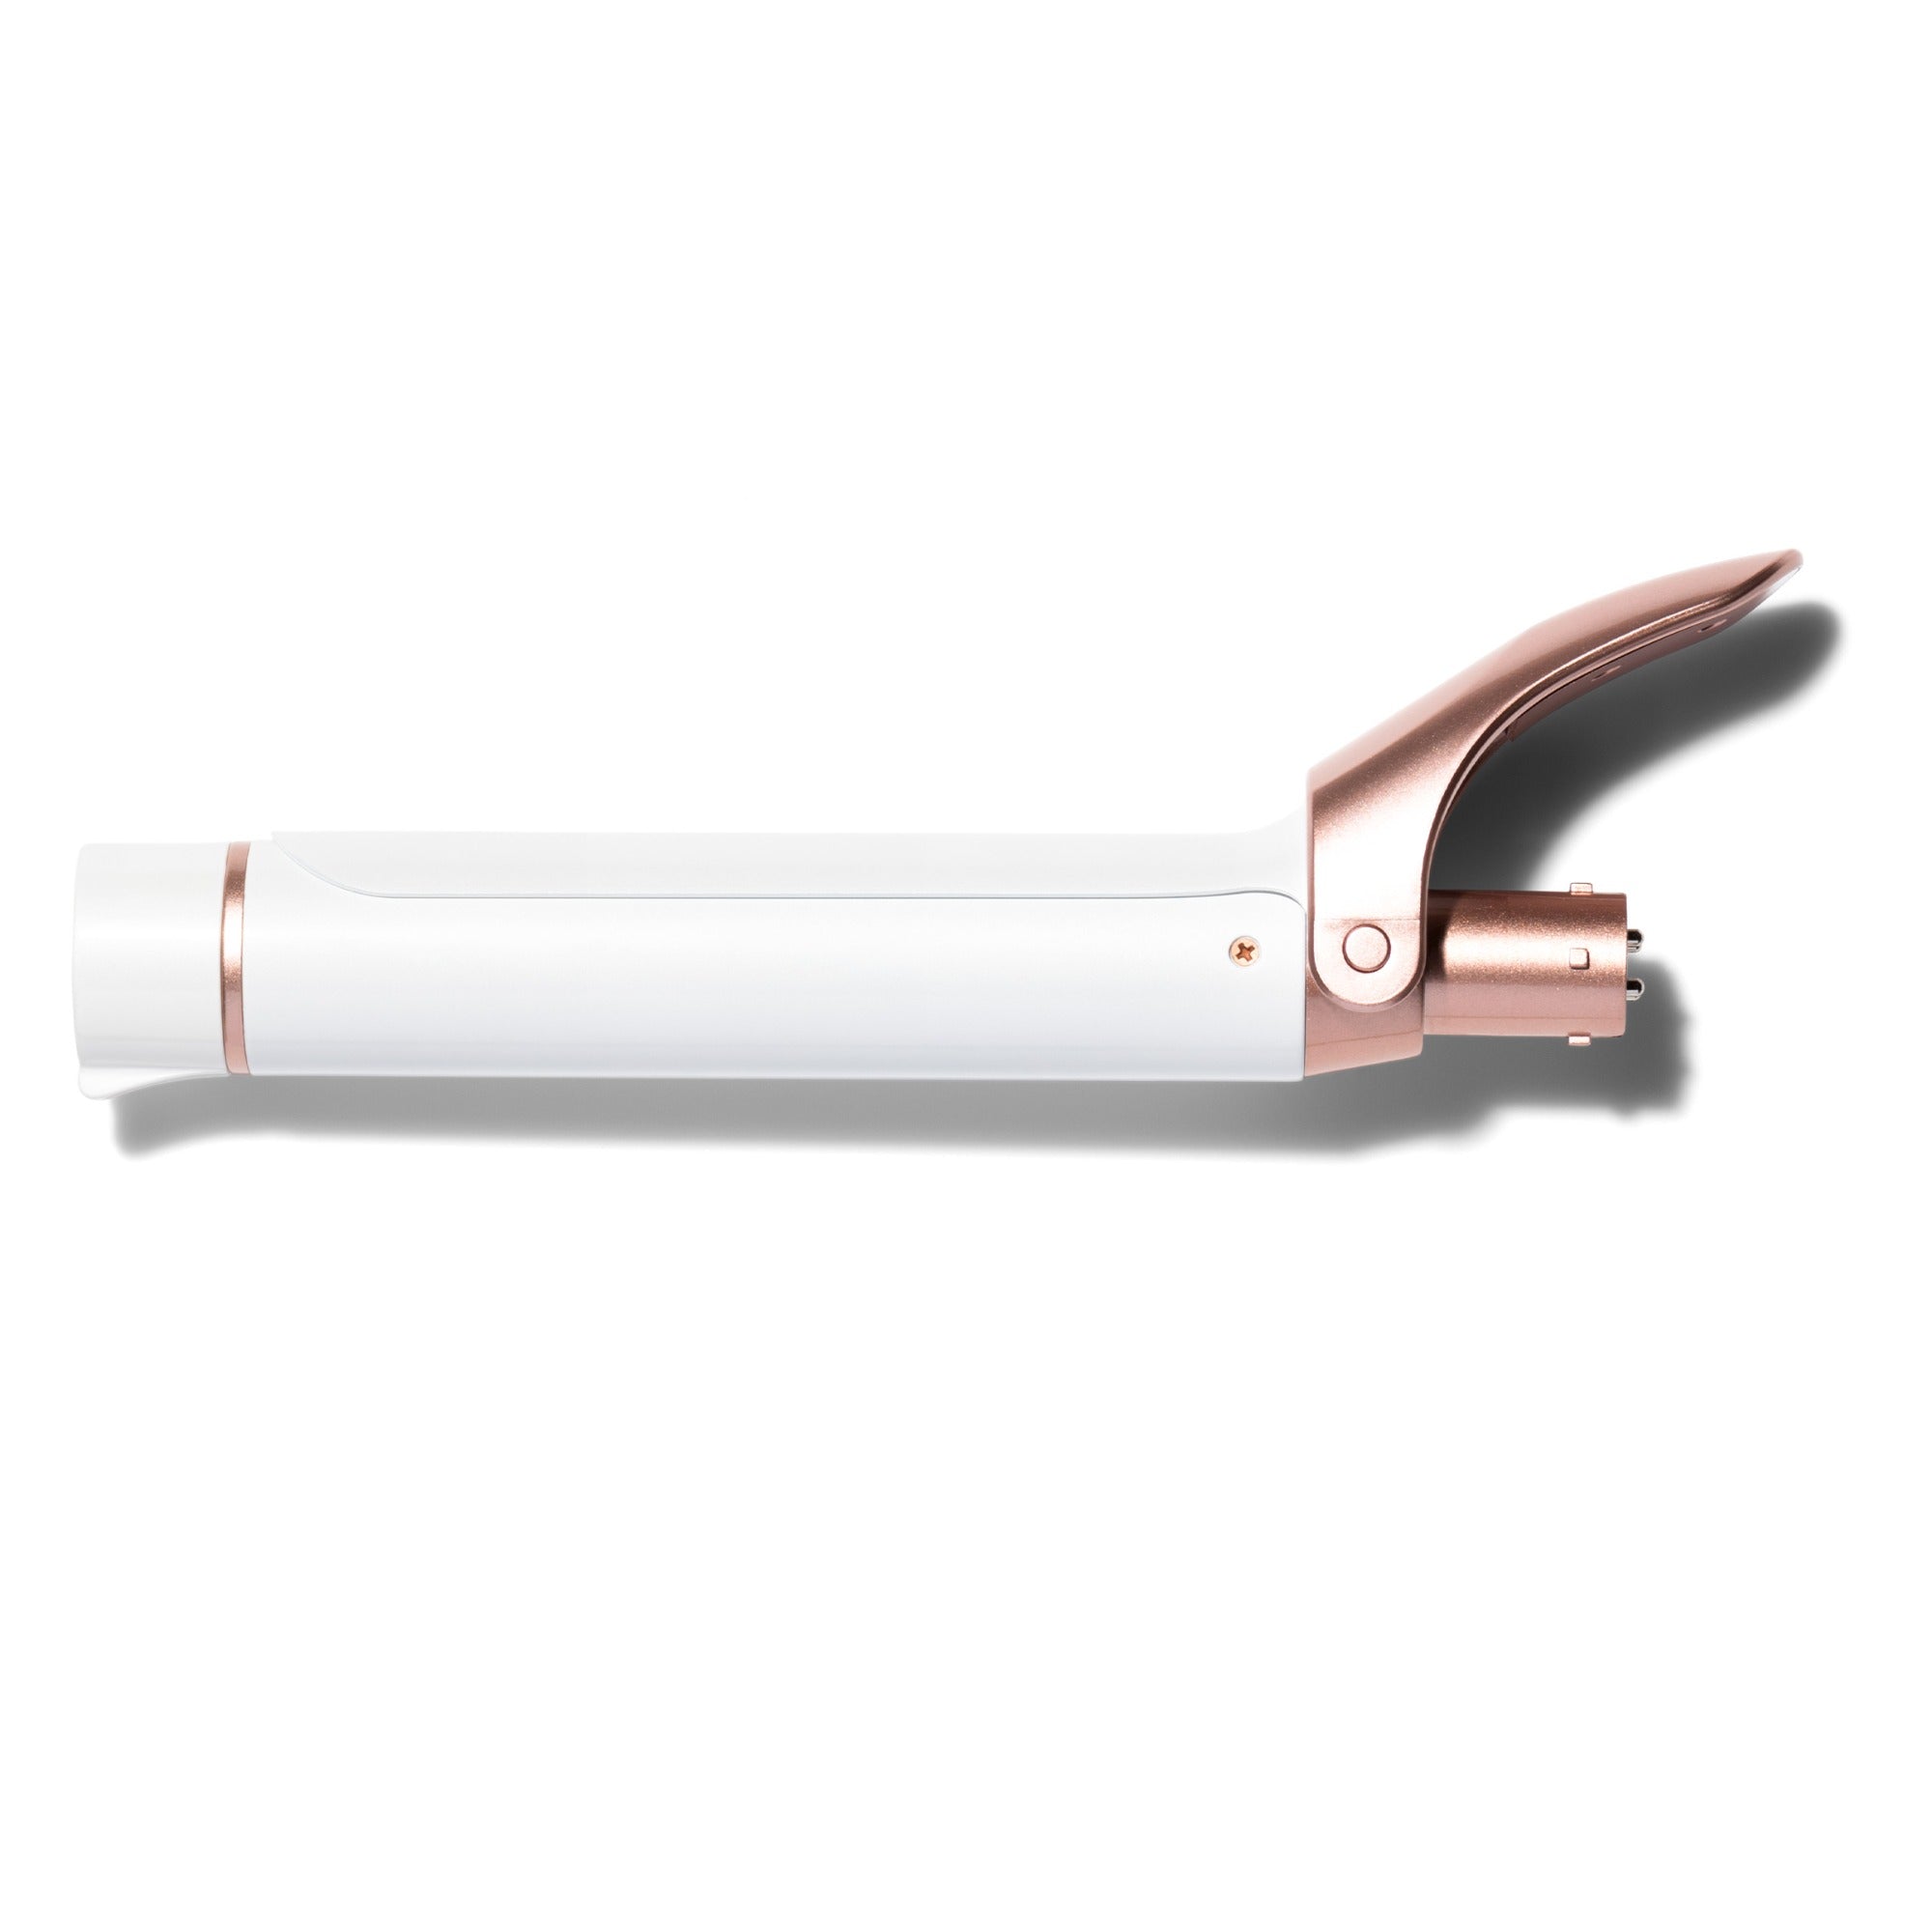 Side view of the T3 1.25” Polished Clip Barrel Curling Iron compatible with T3 Convertible Base